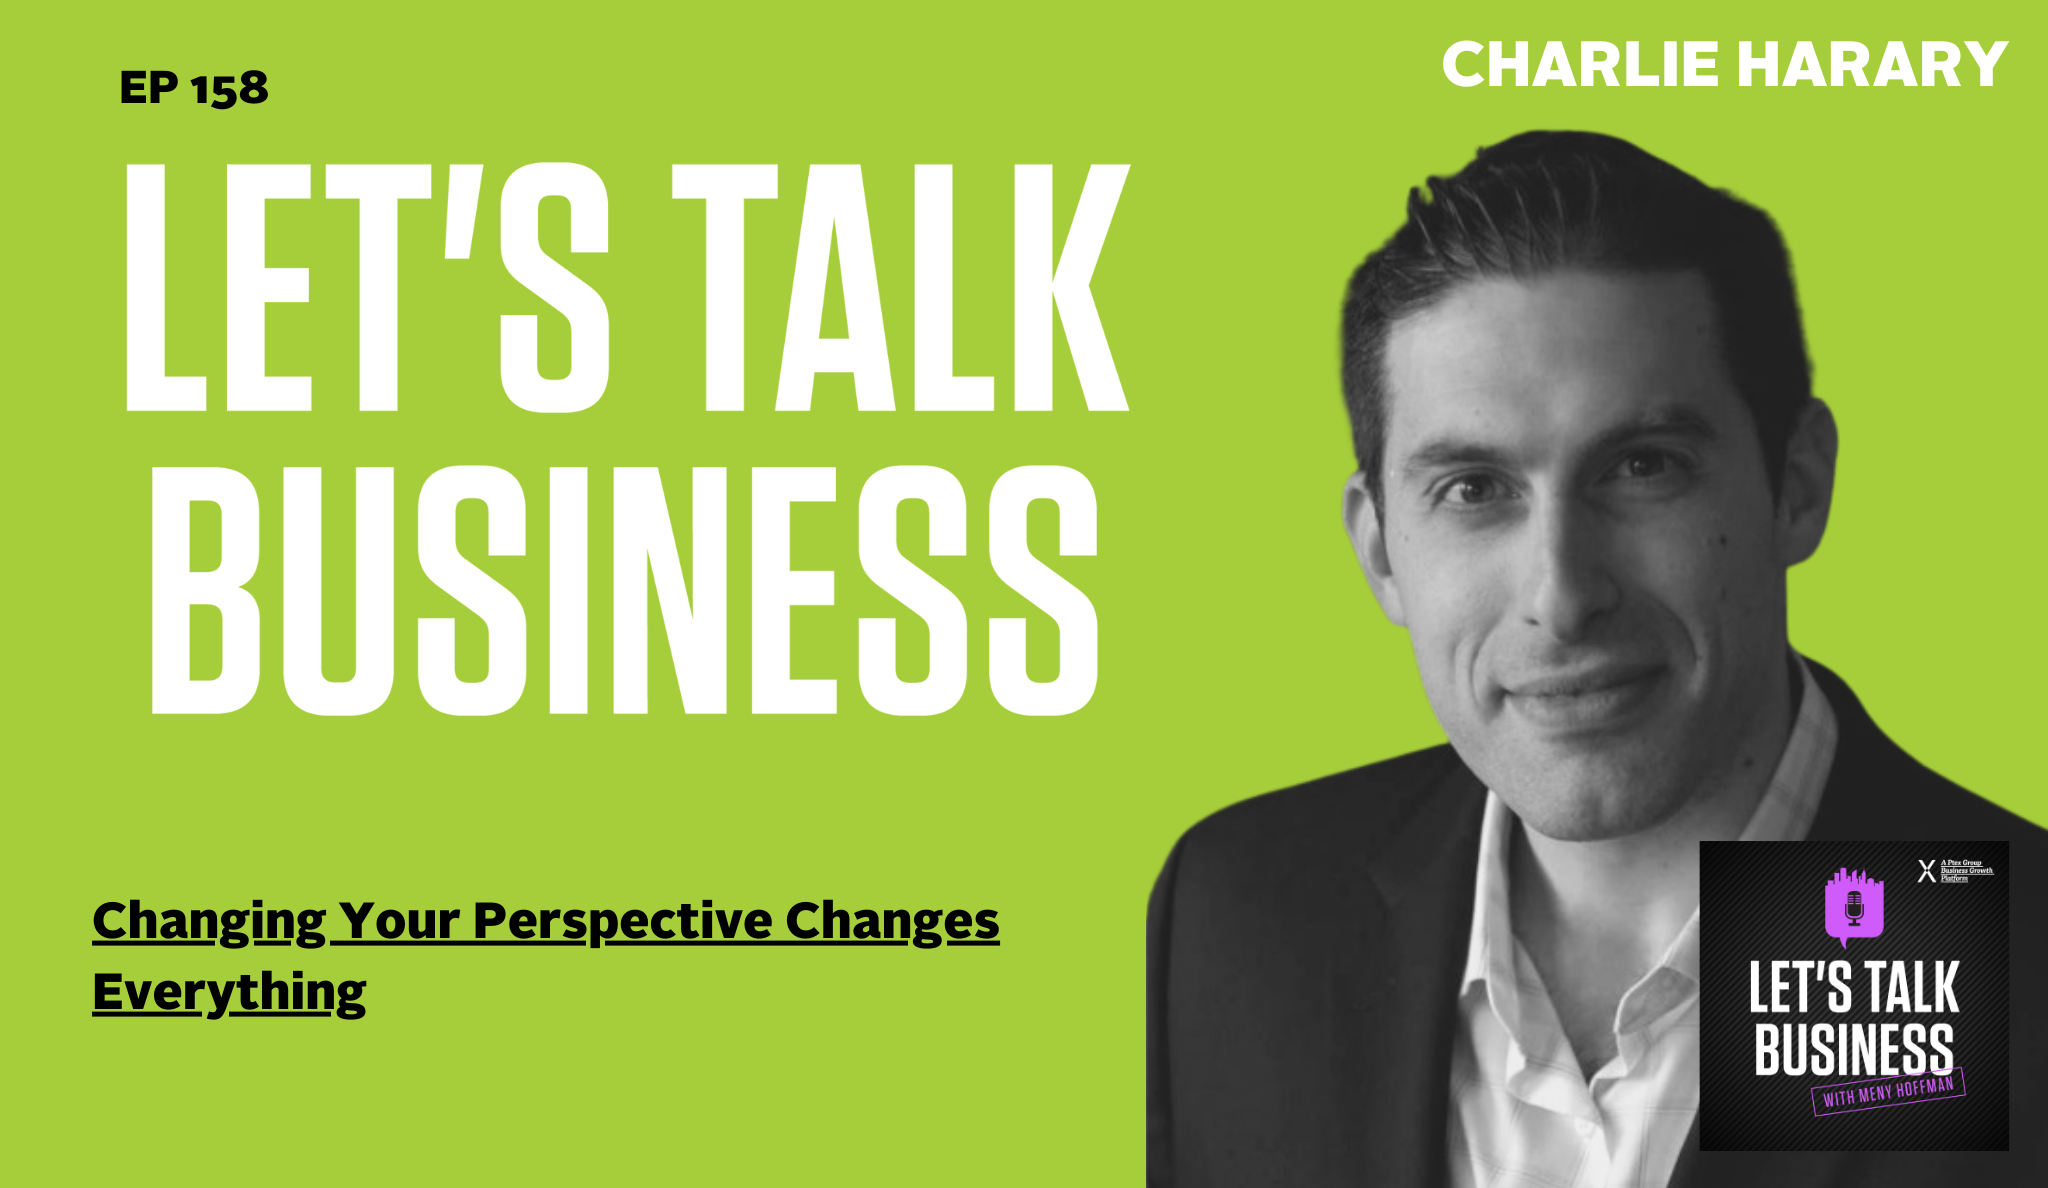 Changing Your Perspective Changes Everything—with Charlie Harary